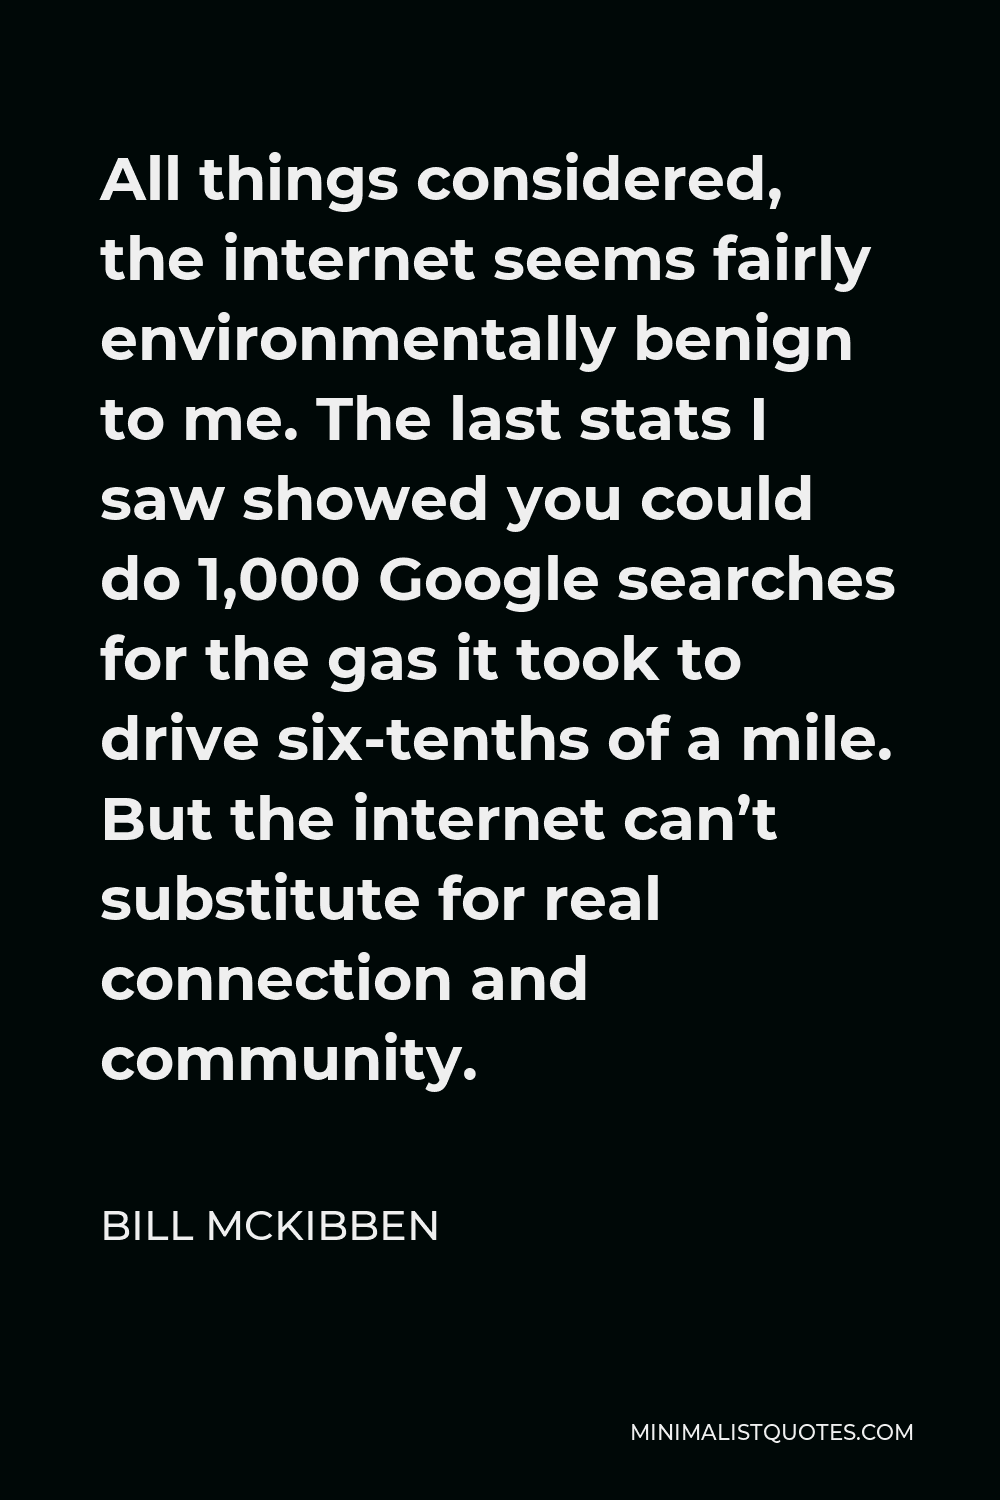 Bill McKibben Quote - All things considered, the internet seems fairly environmentally benign to me. The last stats I saw showed you could do 1,000 Google searches for the gas it took to drive six-tenths of a mile. But the internet can’t substitute for real connection and community.